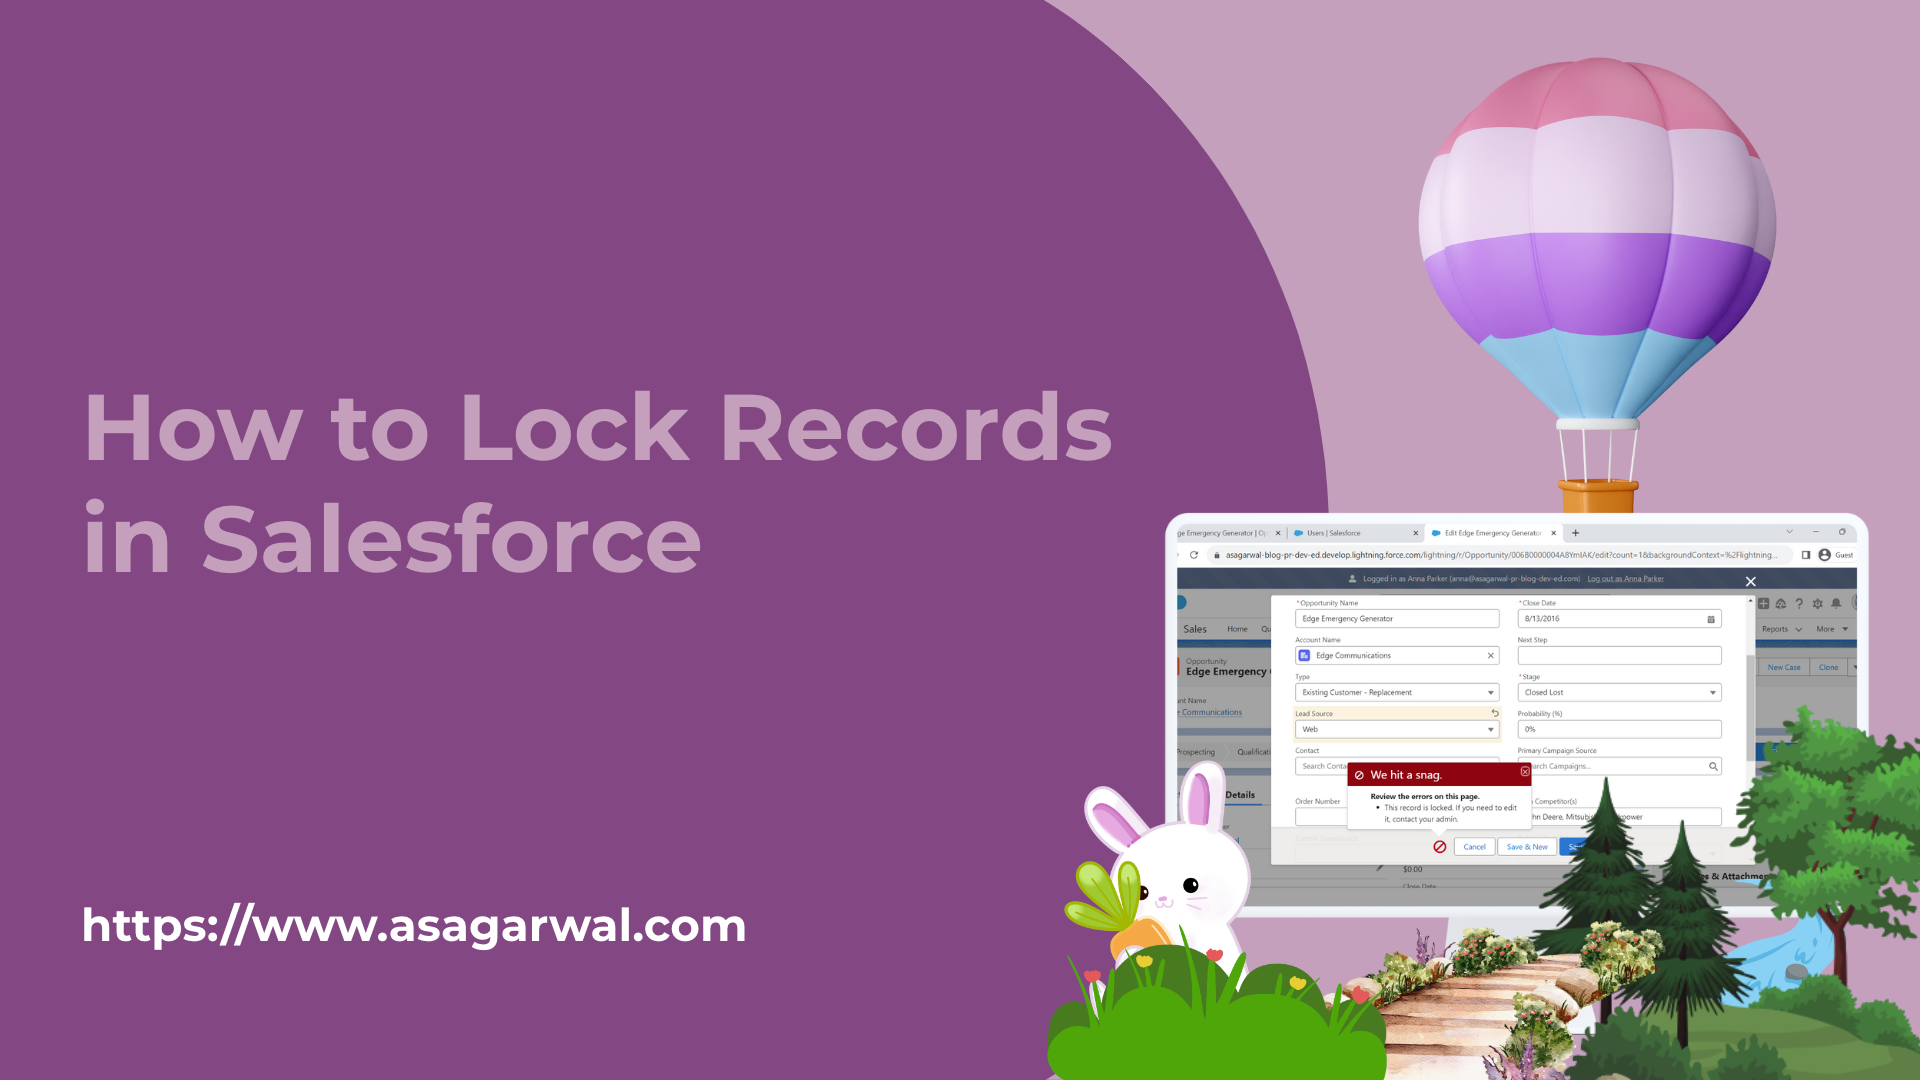 How To Lock Records in Salesforce